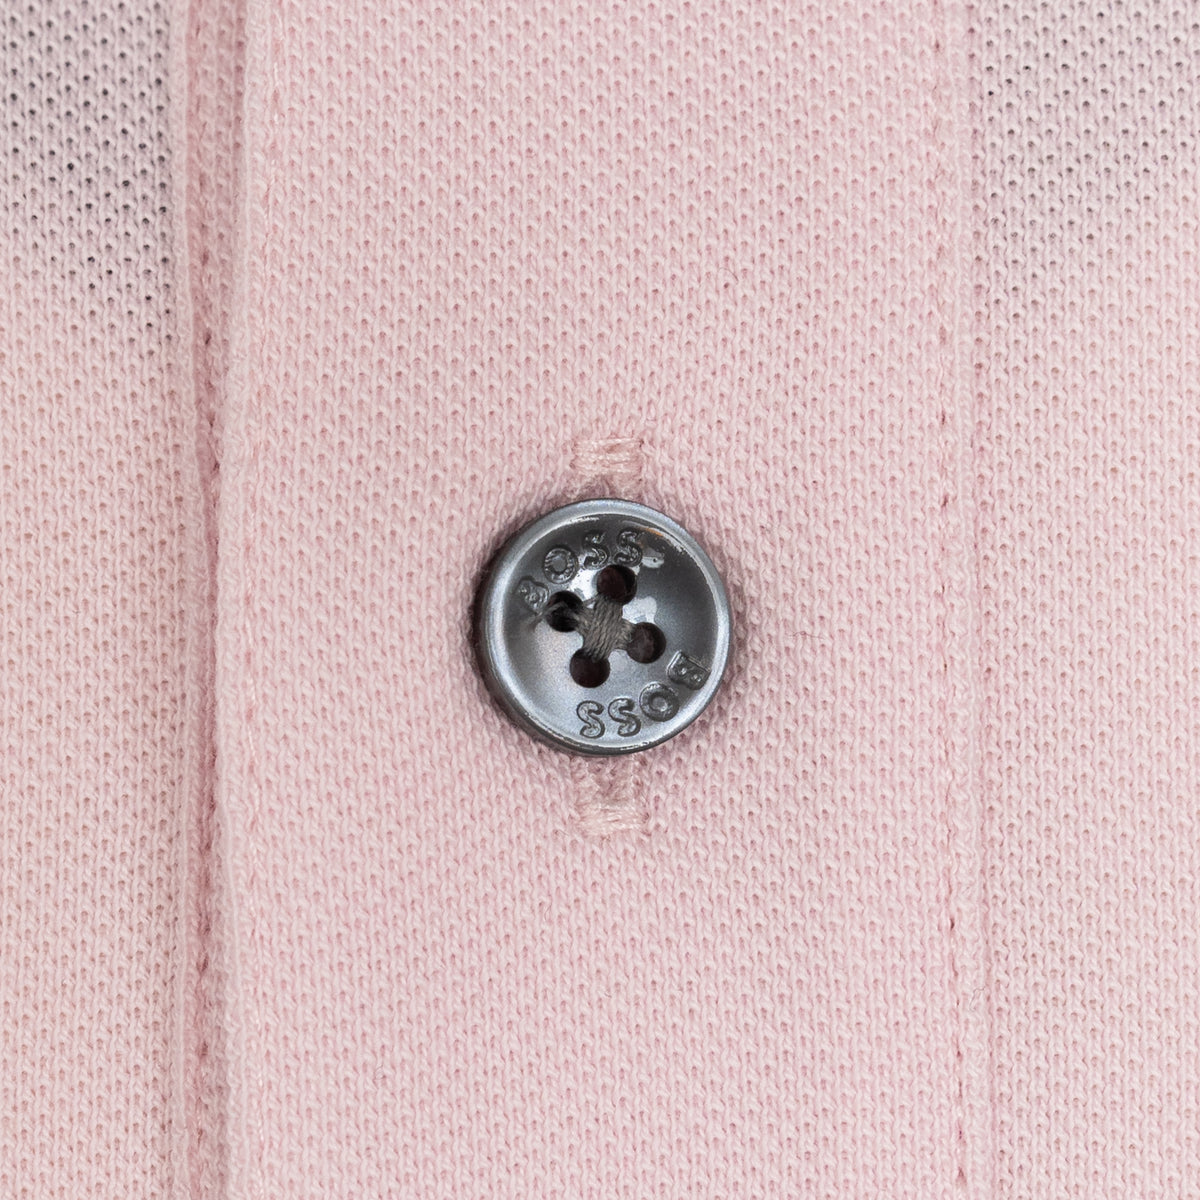 Load image into Gallery viewer, BOSS Pink Pallas Logo Polo
